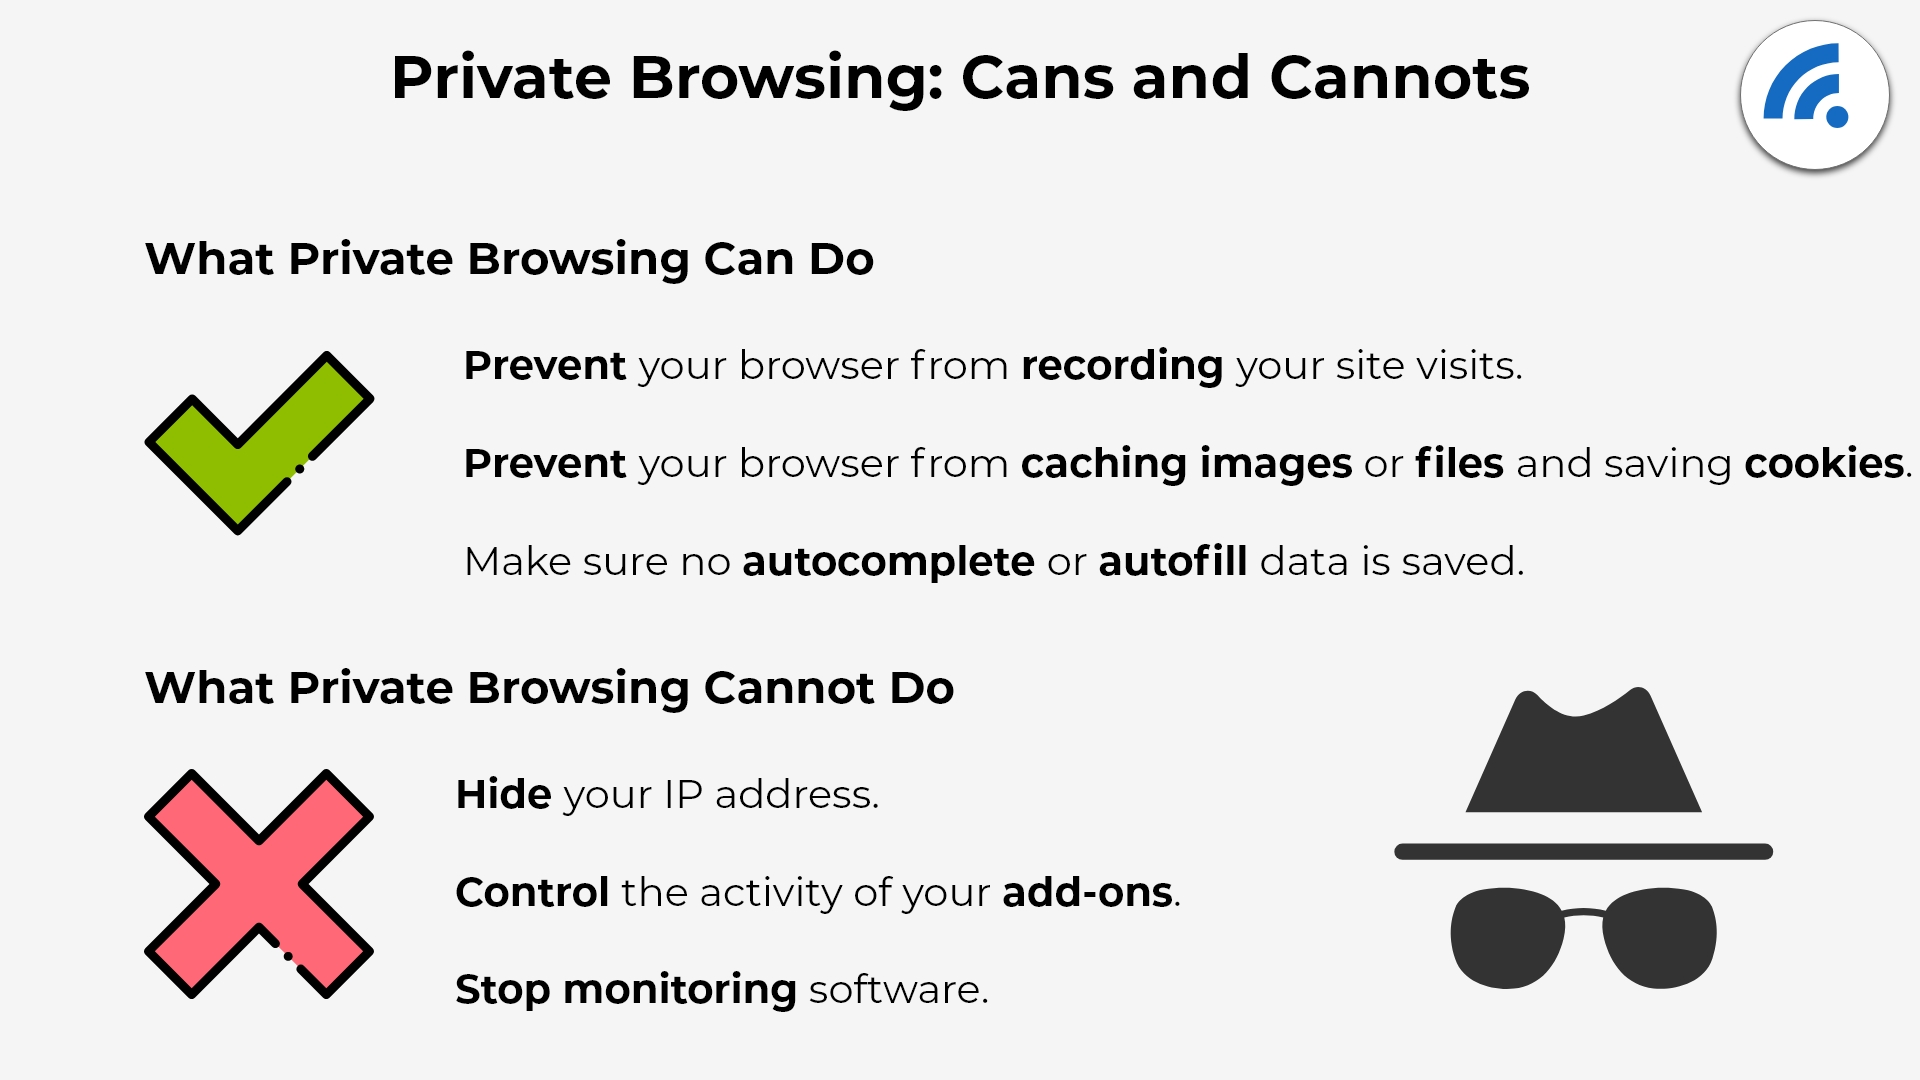 What Private Browsing Can And Cannot Do